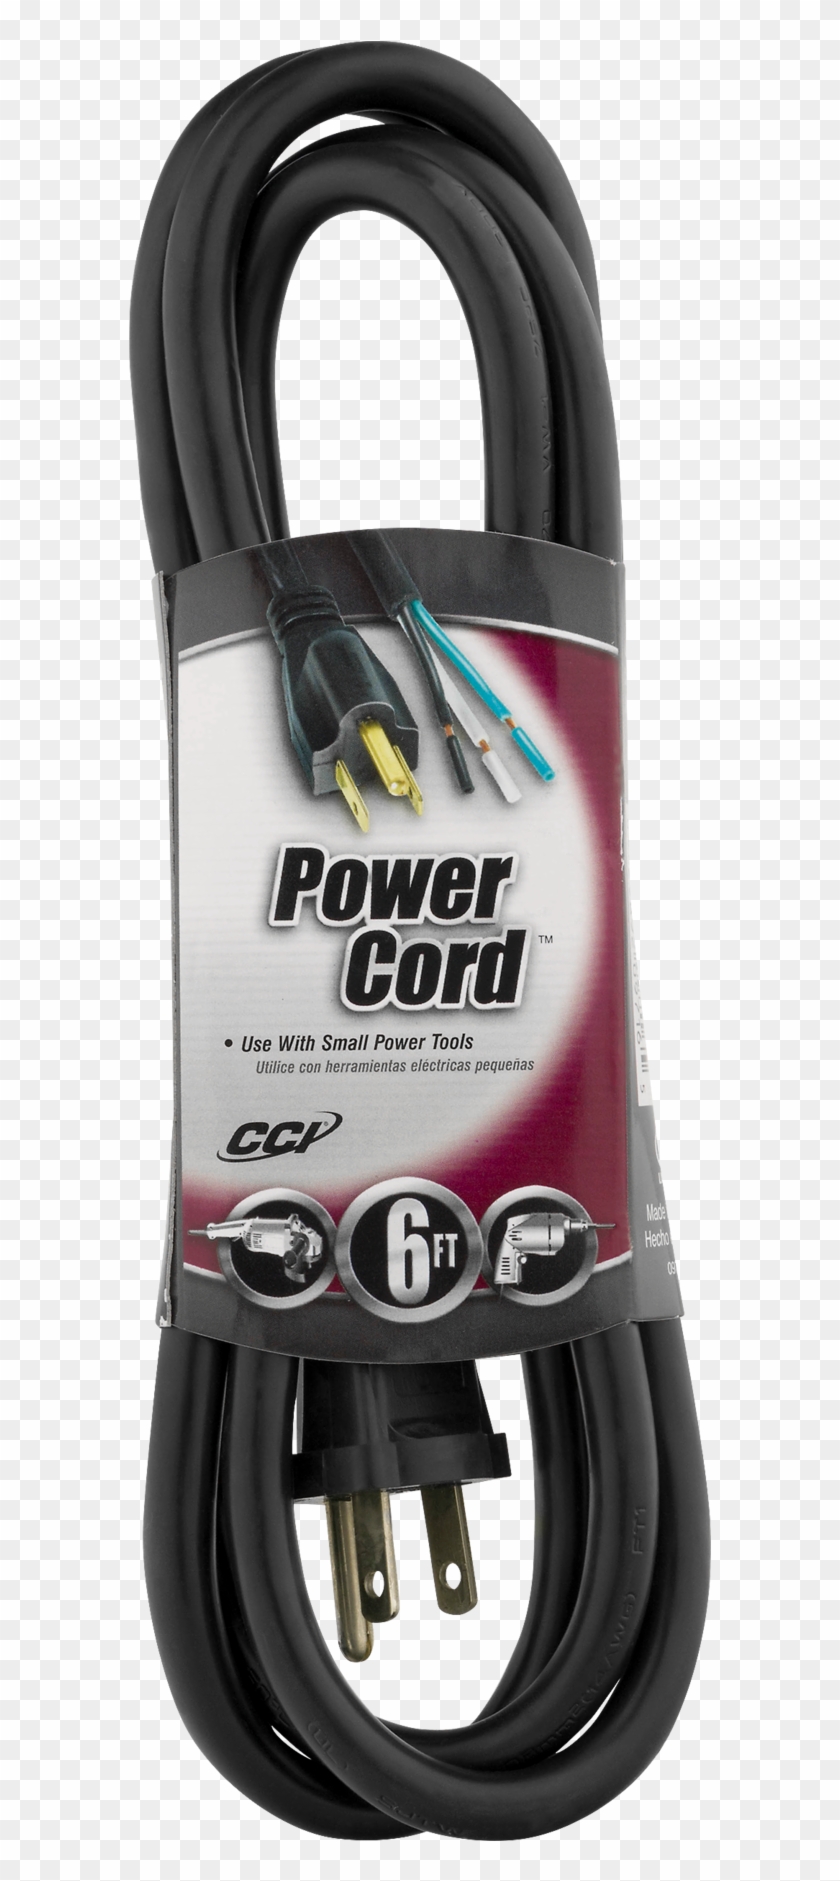 Cci Power Cord - Usb Cable Clipart #3690433